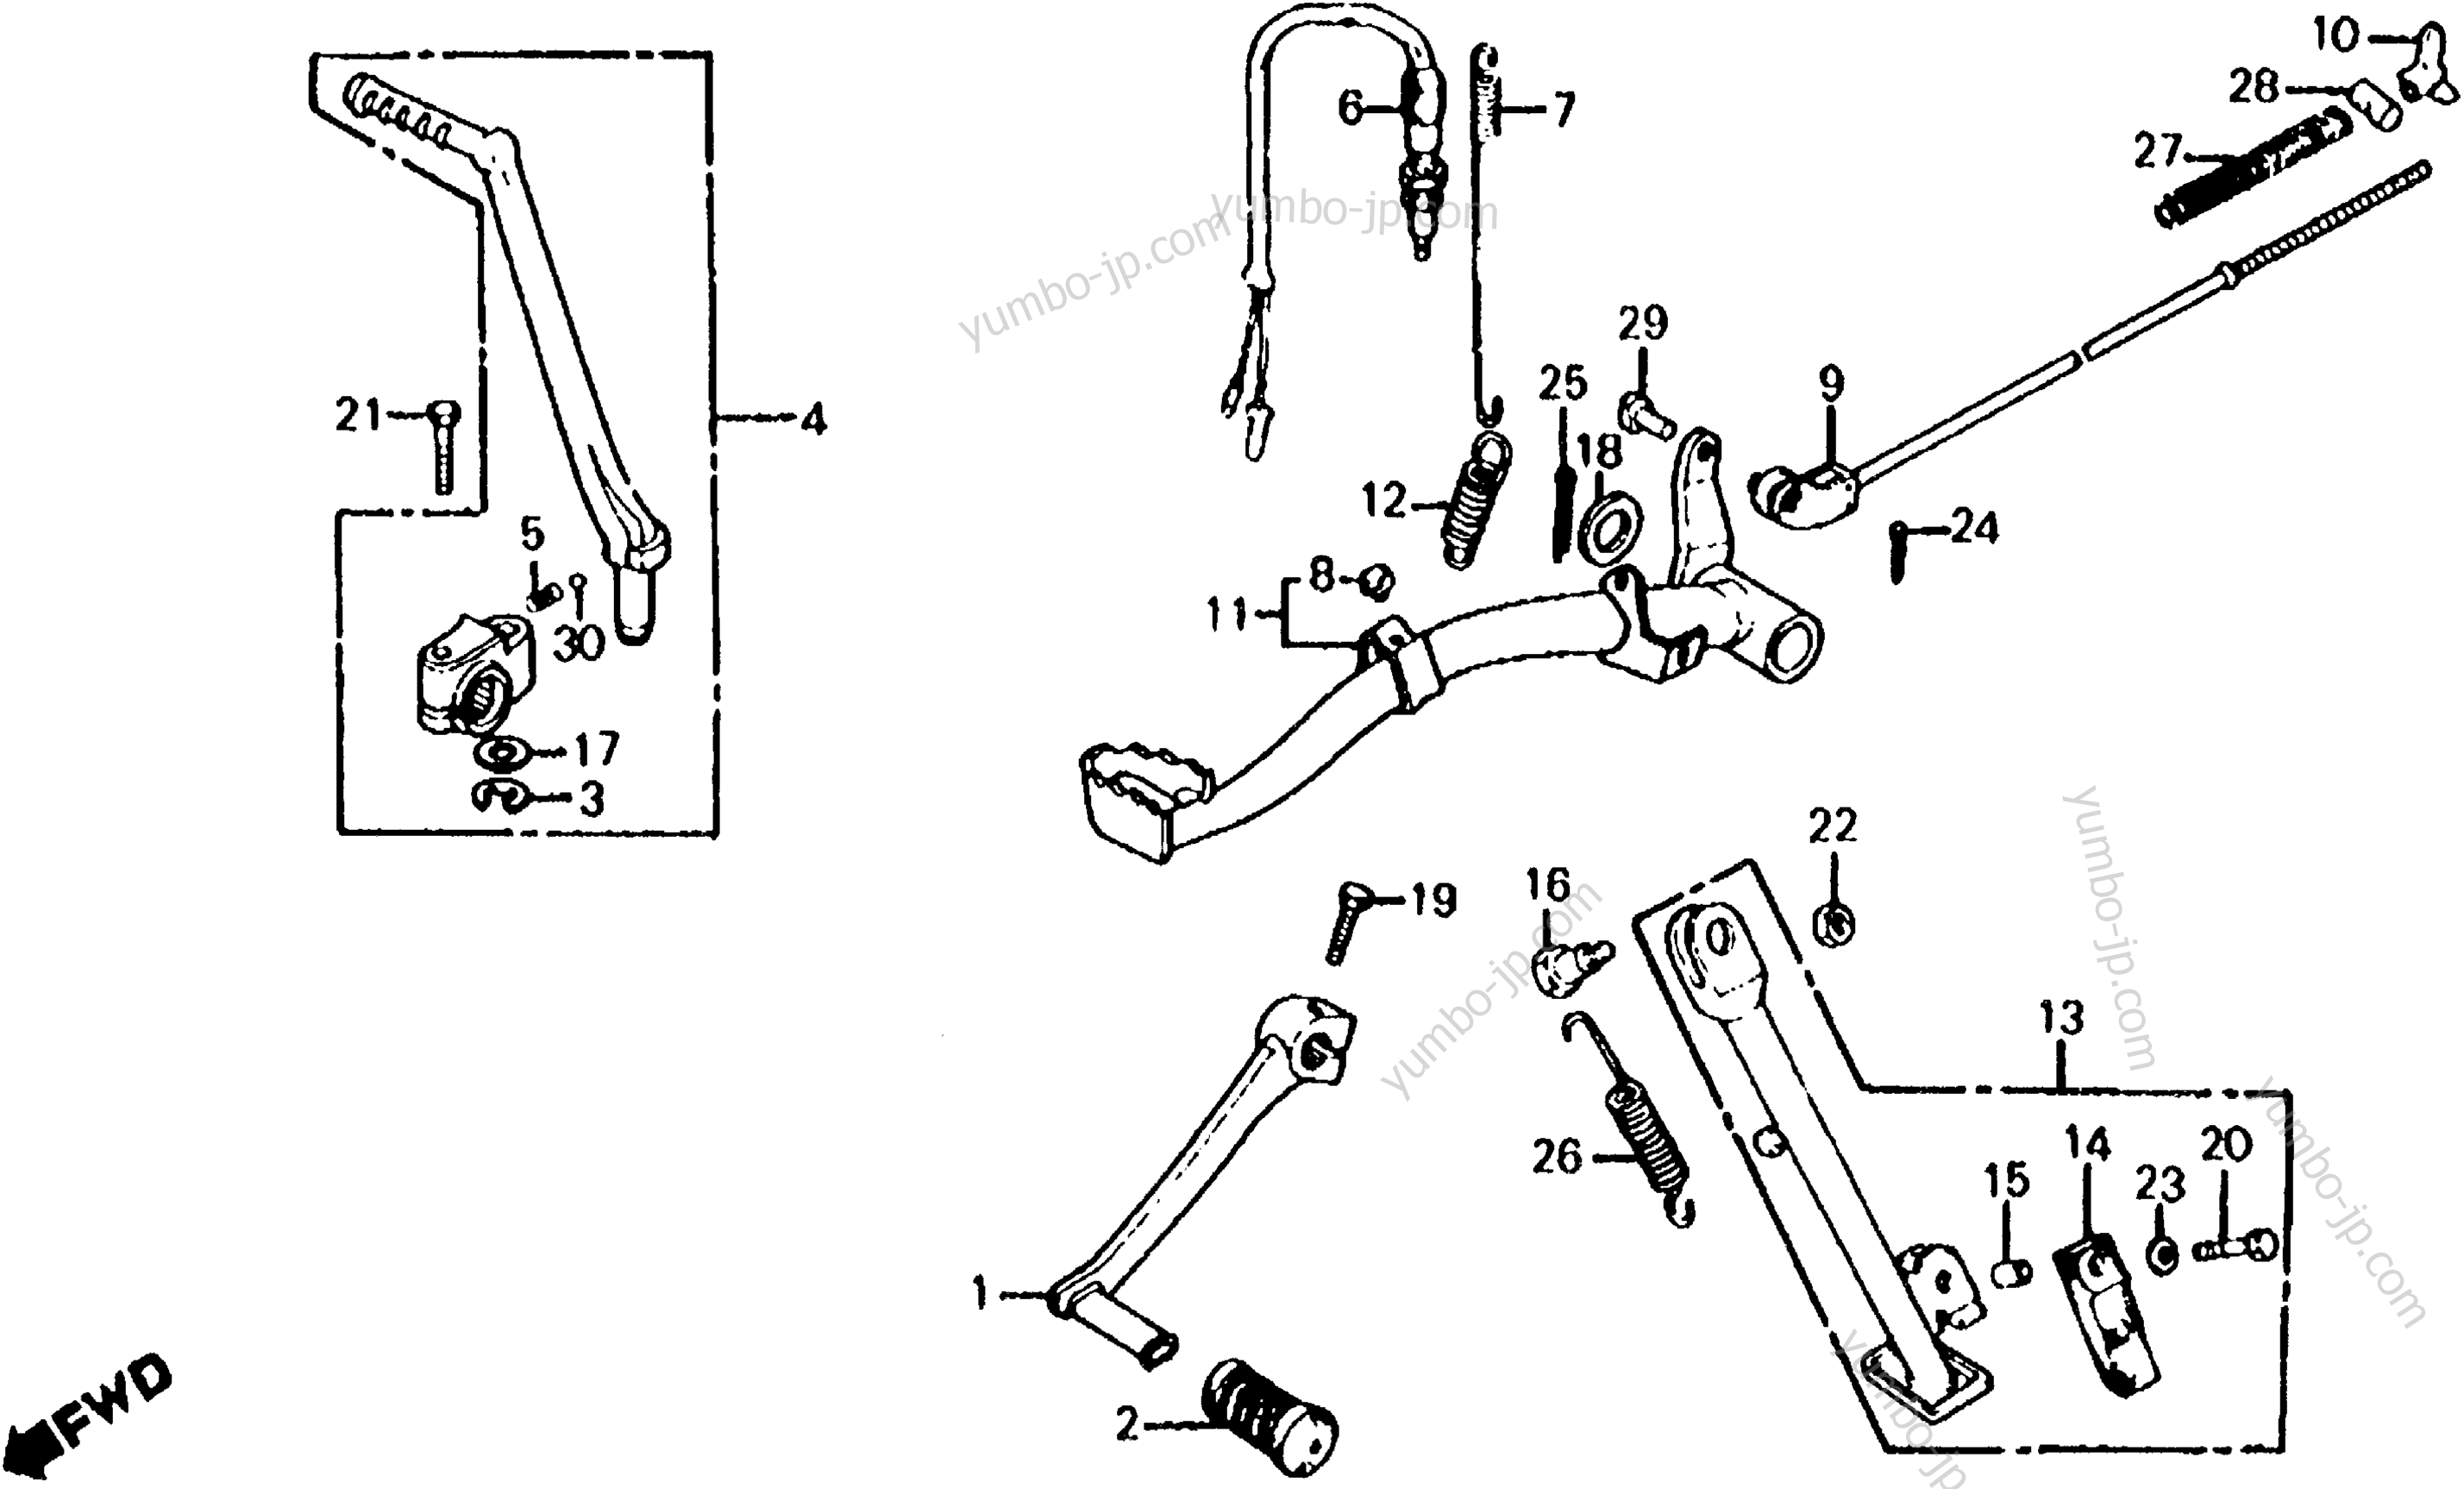 BRAKE PEDAL / GEARSHIFT PEDAL / KICK STARTER ARM for motorcycles HONDA XL100S A 1985 year